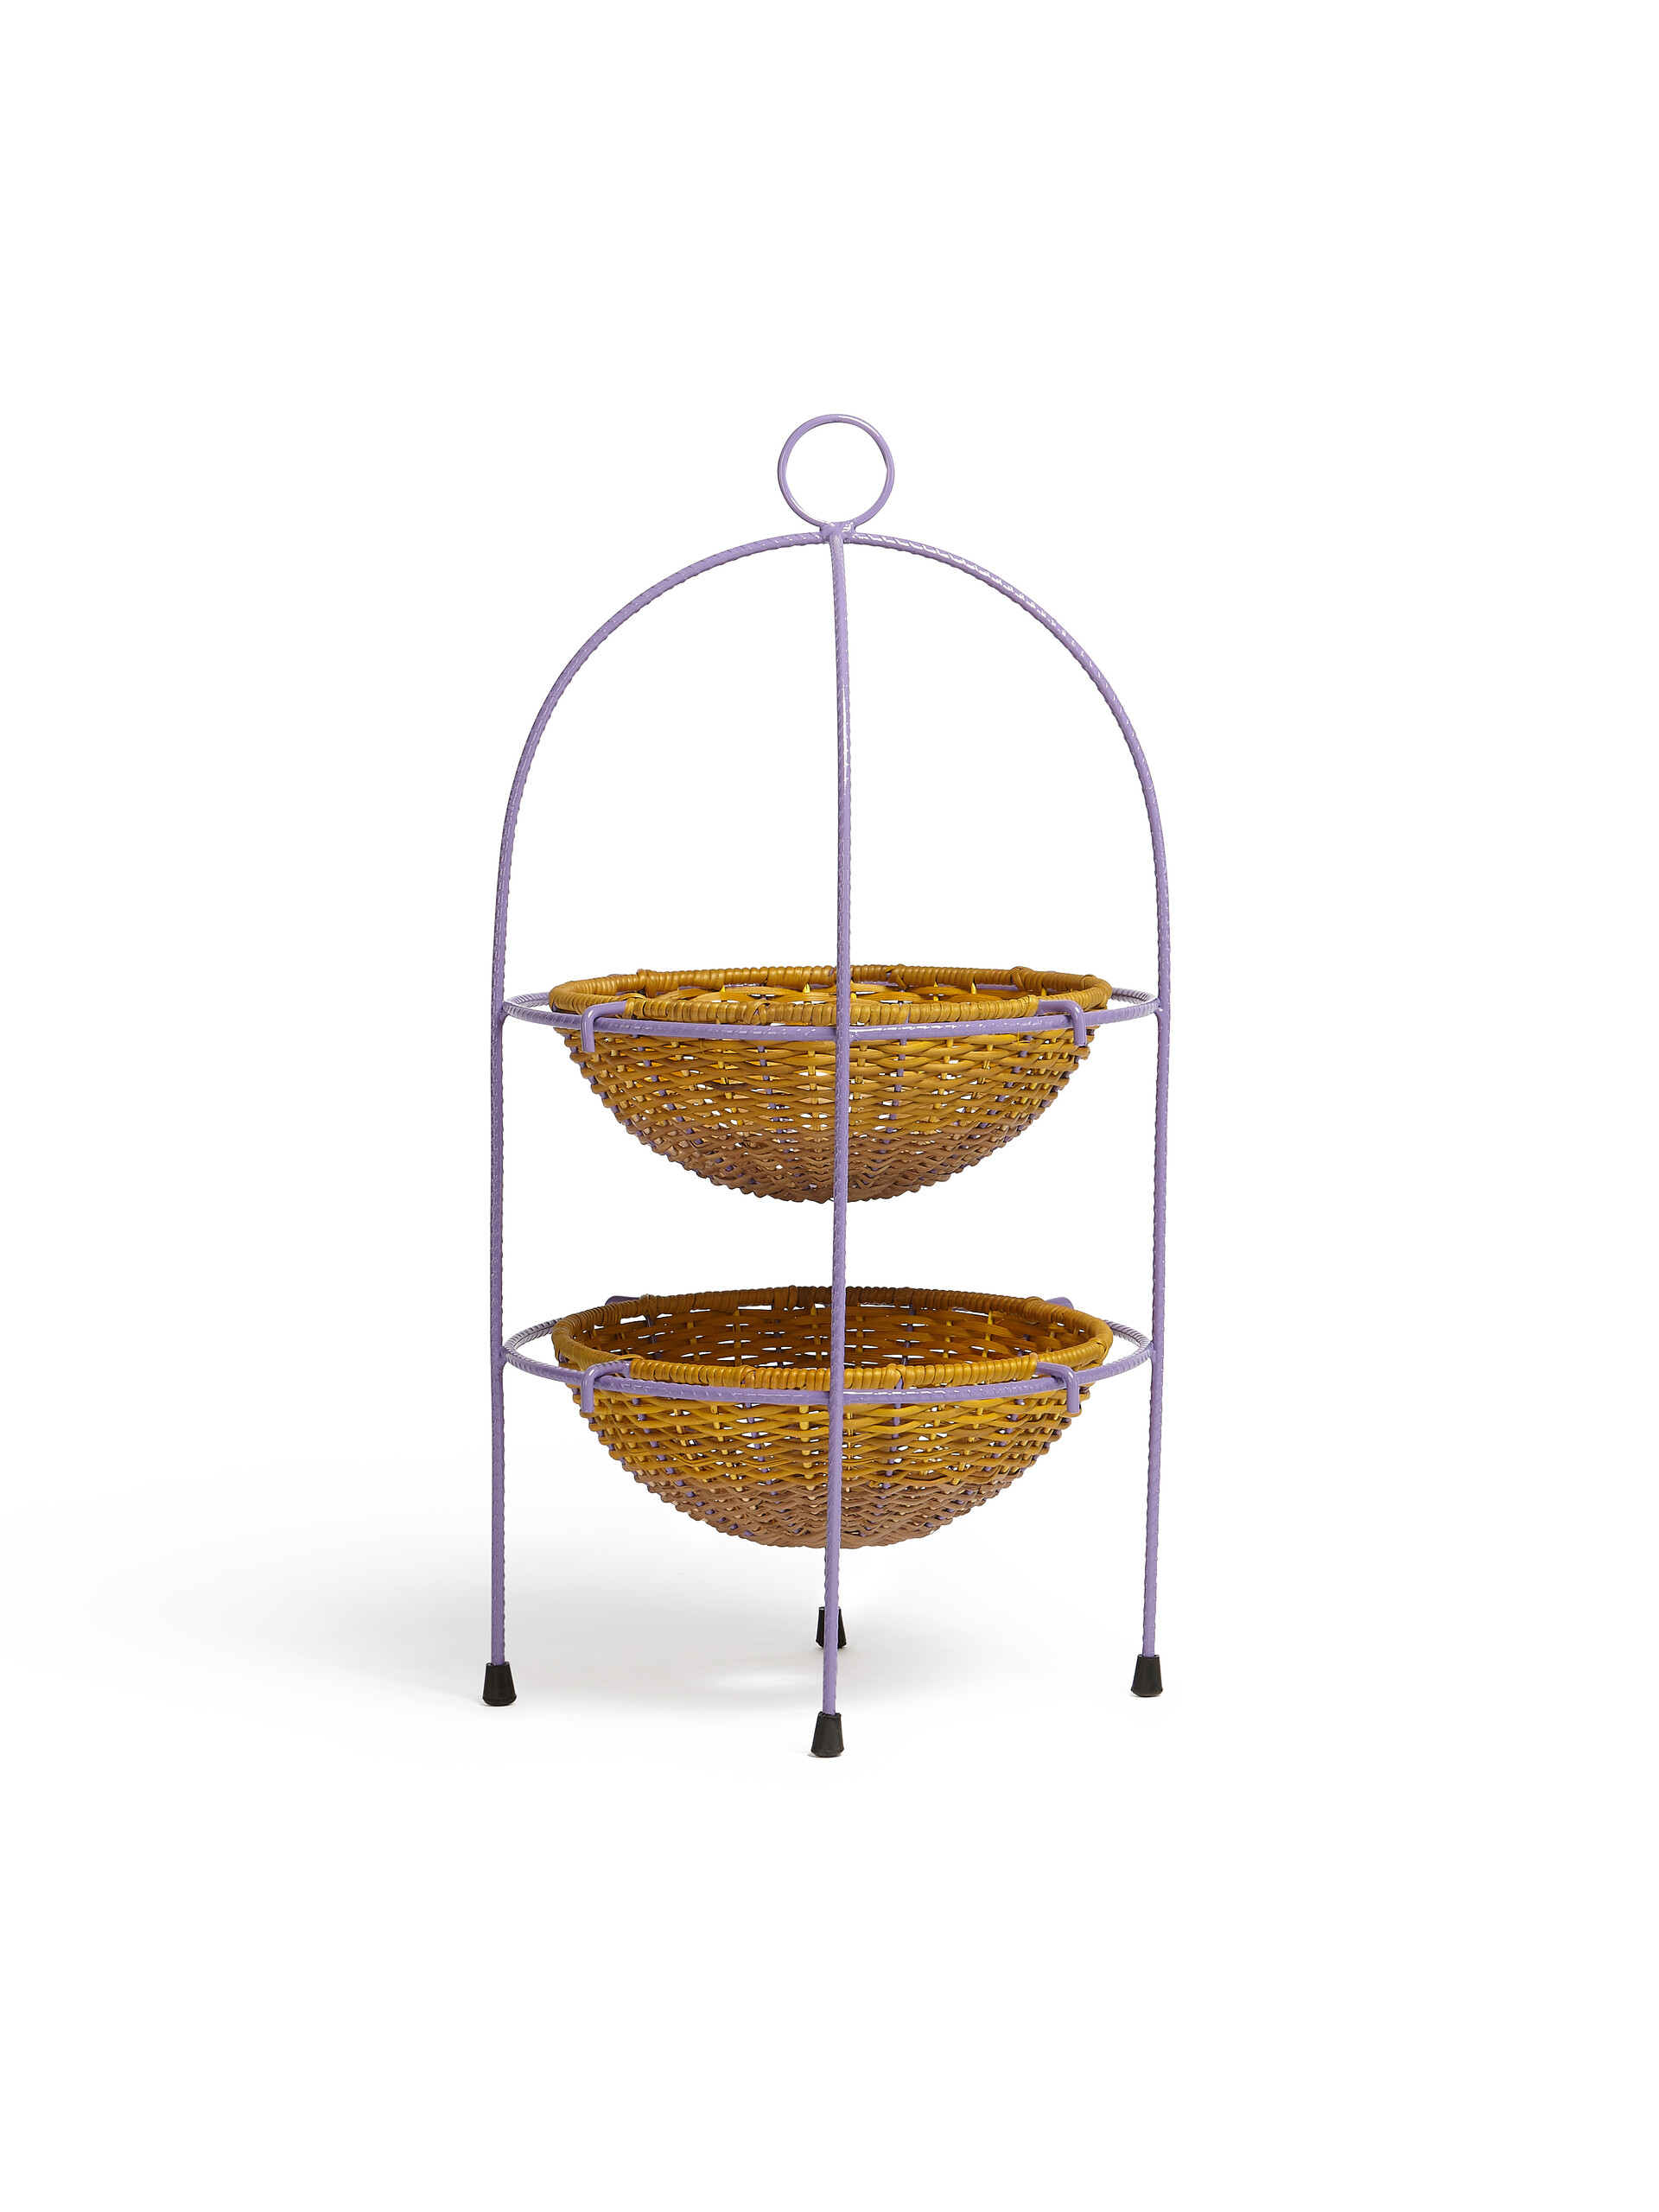 MARNI MARKET fruitstand in iron and yellow fibre - Accessories - Image 3